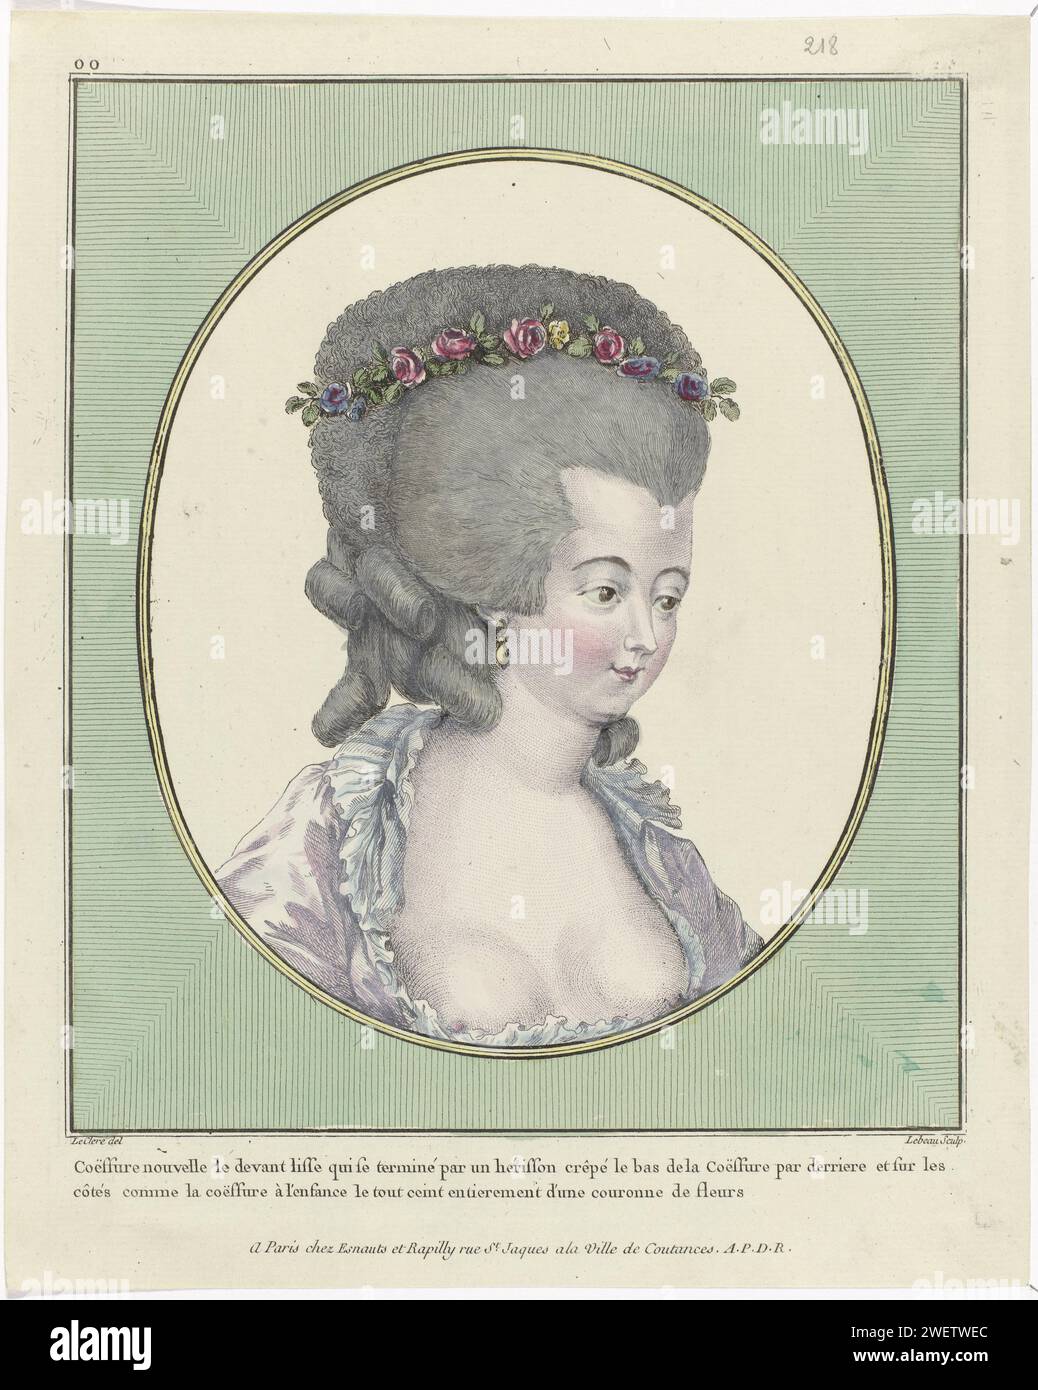 Coiffures, Poufs, Hats and Bonnets: Eleven Coiffures and Headdresses, 1781  Vrouwenbust deep cleavage, in oval. Coiffure where the hair is combed smoothly backwards, has been pulled on top as 'Hérisson' and has curls on the rear and sides such as a haircut 'à l'Enfance'. The whole is decorated with a crown of flowers. Earring in the right ear. Print from the OO series. 38th Cahier des Costumes Français, 9th Suite des Coeffures à la Mode and 1781, Gallerie des Modes et Costumes Français.  paper engraving fashion plates. styles of hairdress (HERISSON) - AA -  women. ear-rings (+ women's clothes Stock Photo